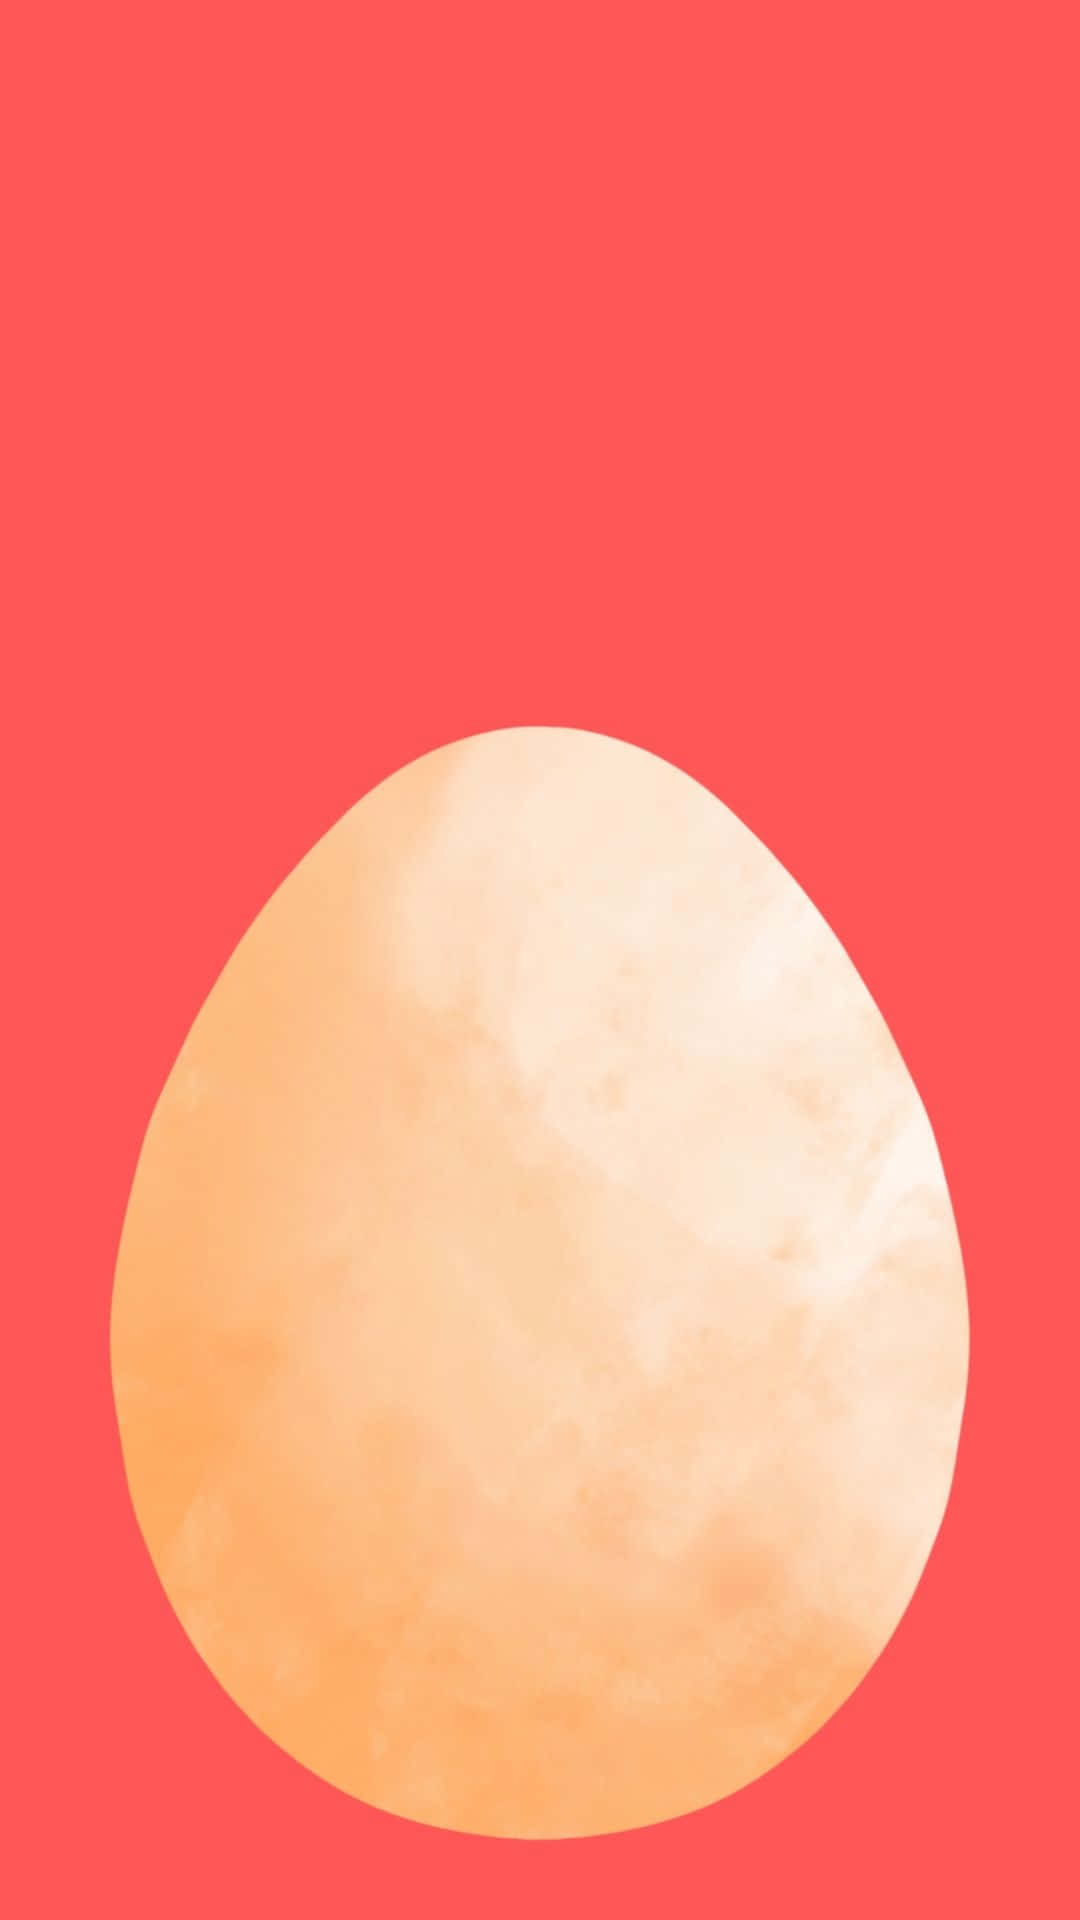 An Egg On A Red Background Wallpaper